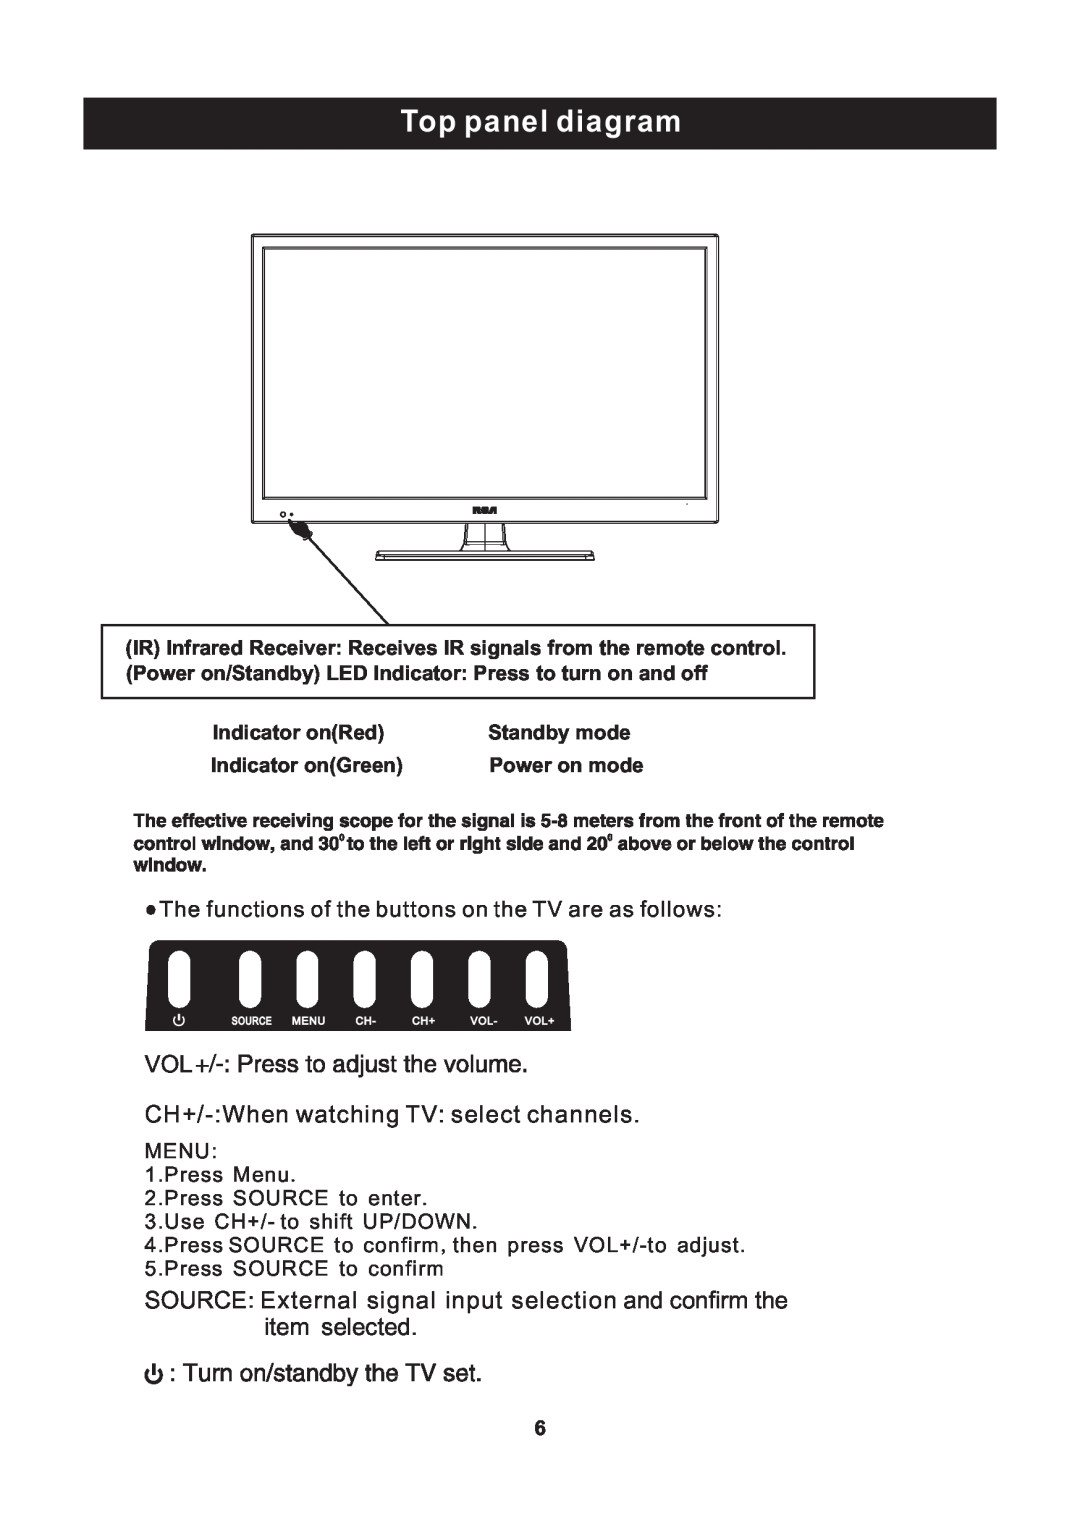 ProScan RLED2445A-B Top panel diagram, VOL CH+/-When watching TV select channels, Indicator onRed, Standby mode 